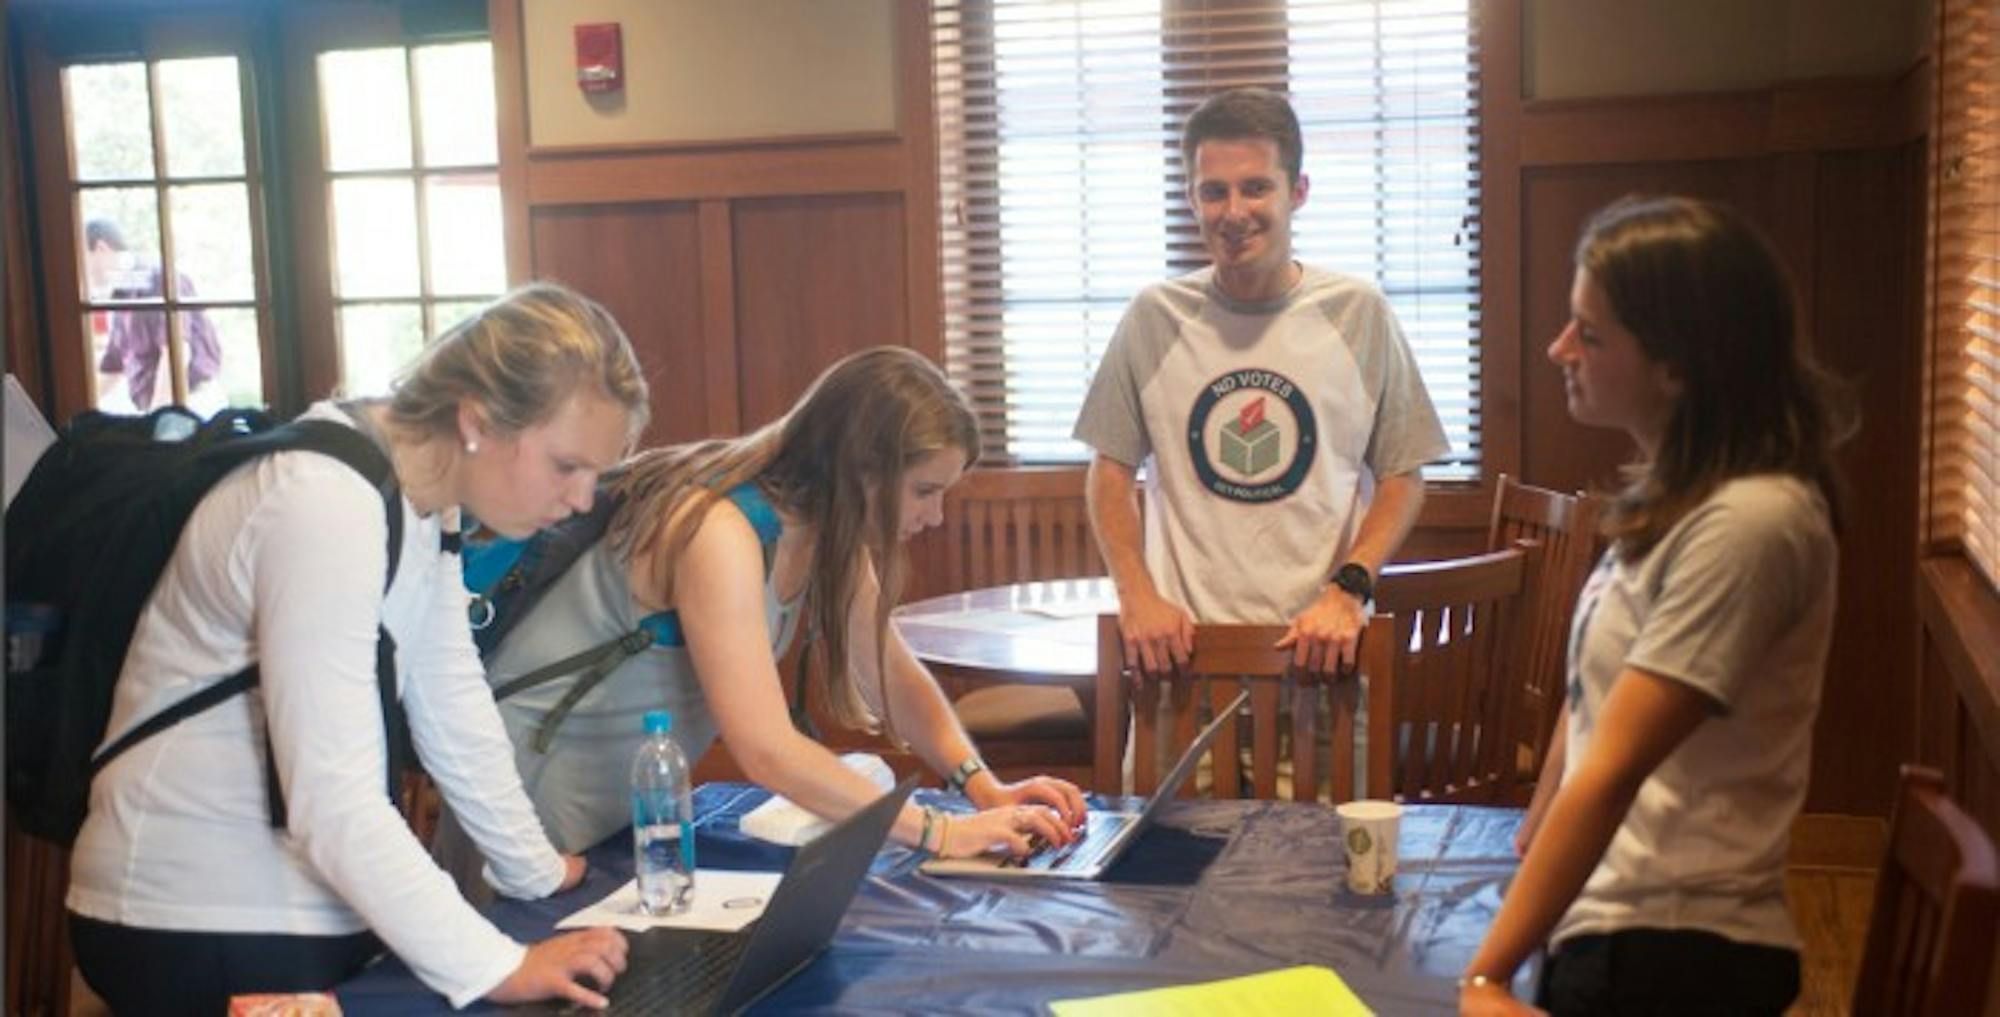 NDVotes representatives help students sign up for TurboVote, an online platform that facilitates the voter registration and absentee voting processes. NDVotes, a non-partisan group, seeks to foster educated voting.